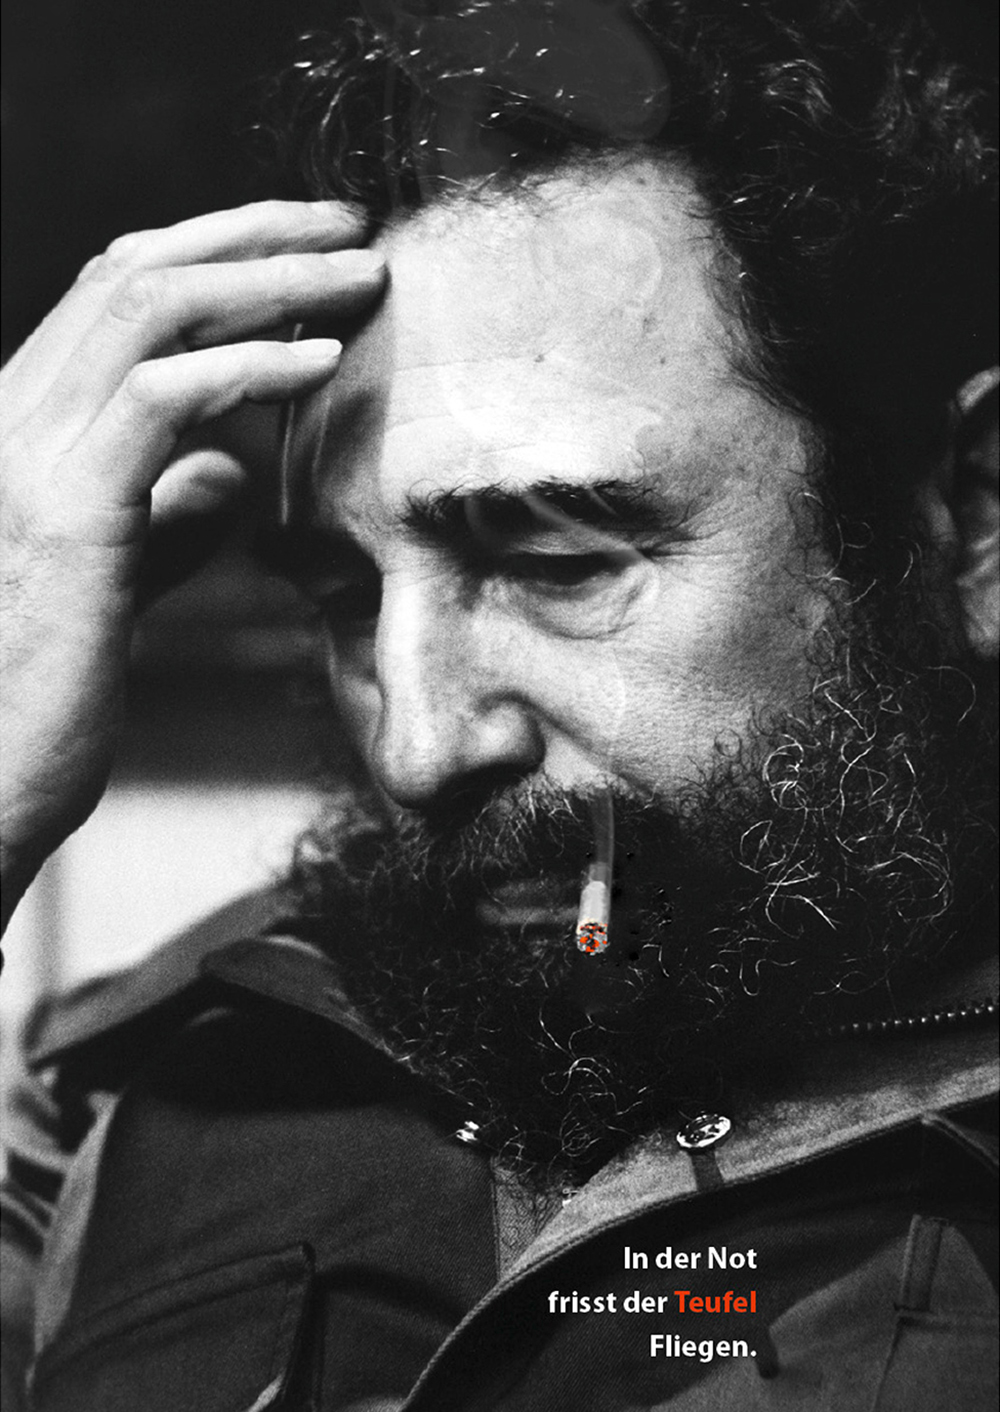 A poster saying "in need the devil eats flies" – depicting Fidel Castro with a regular cigaret.